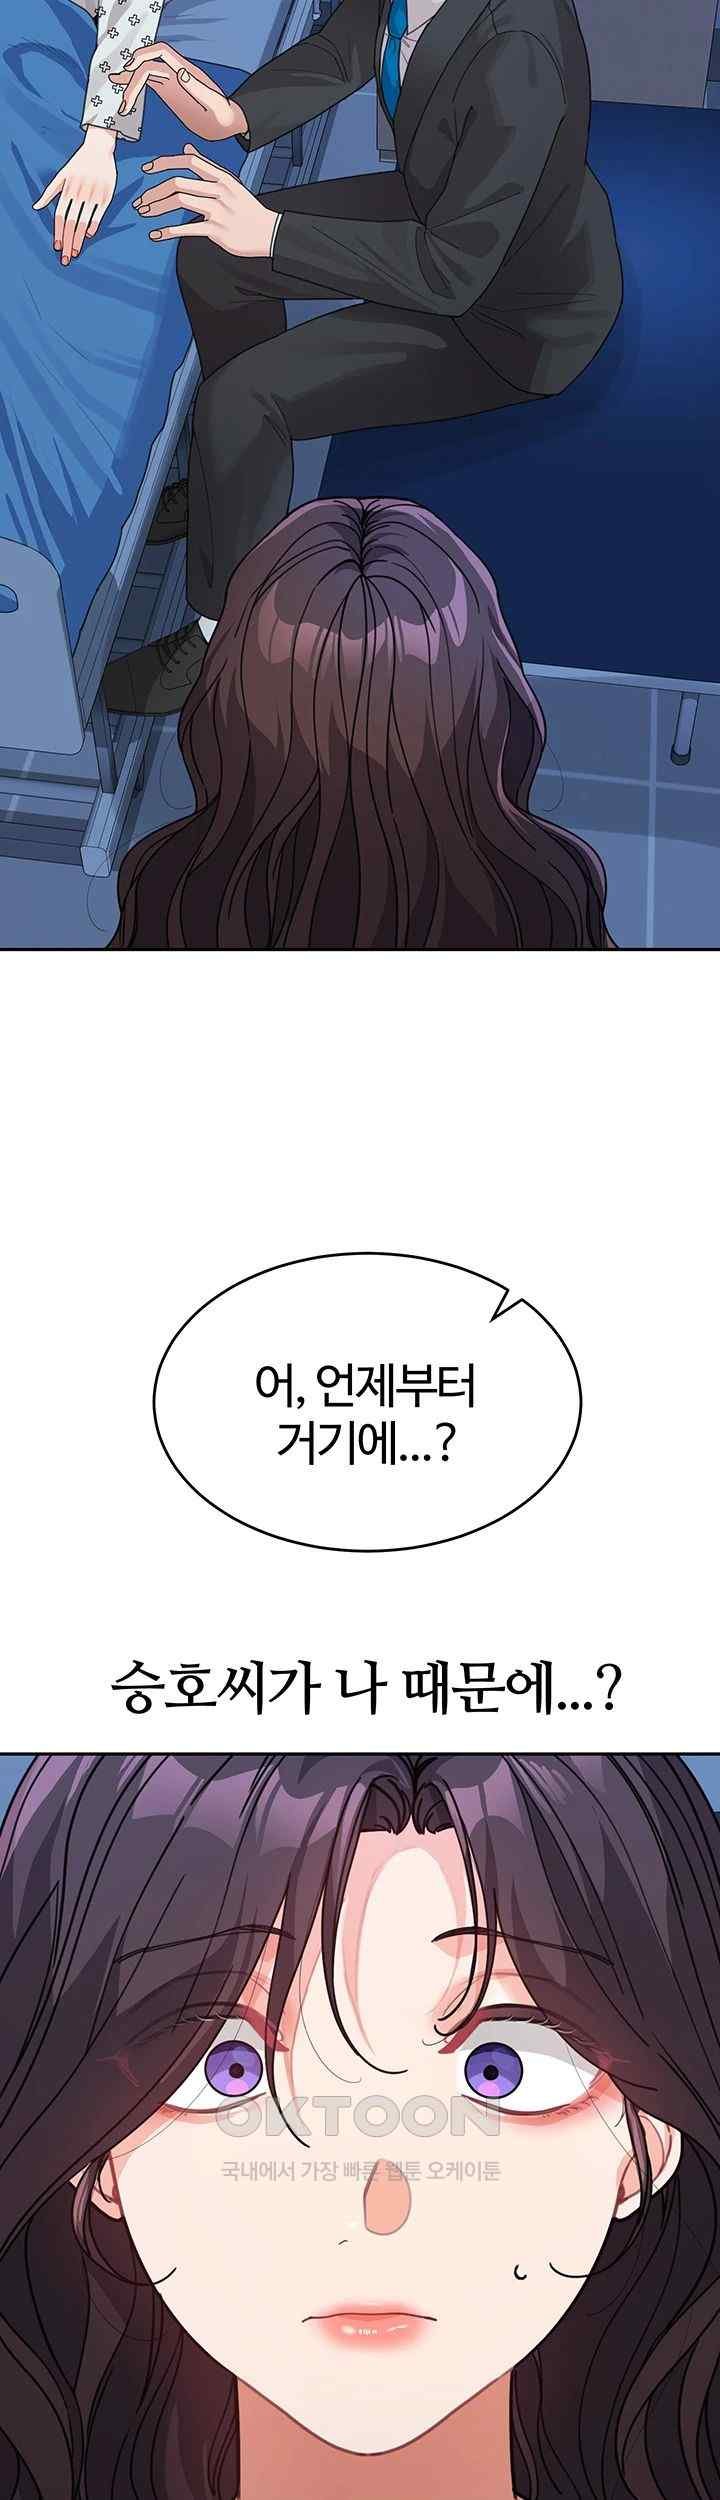 is-it-your-mother-or-sister-raw-chap-35-36